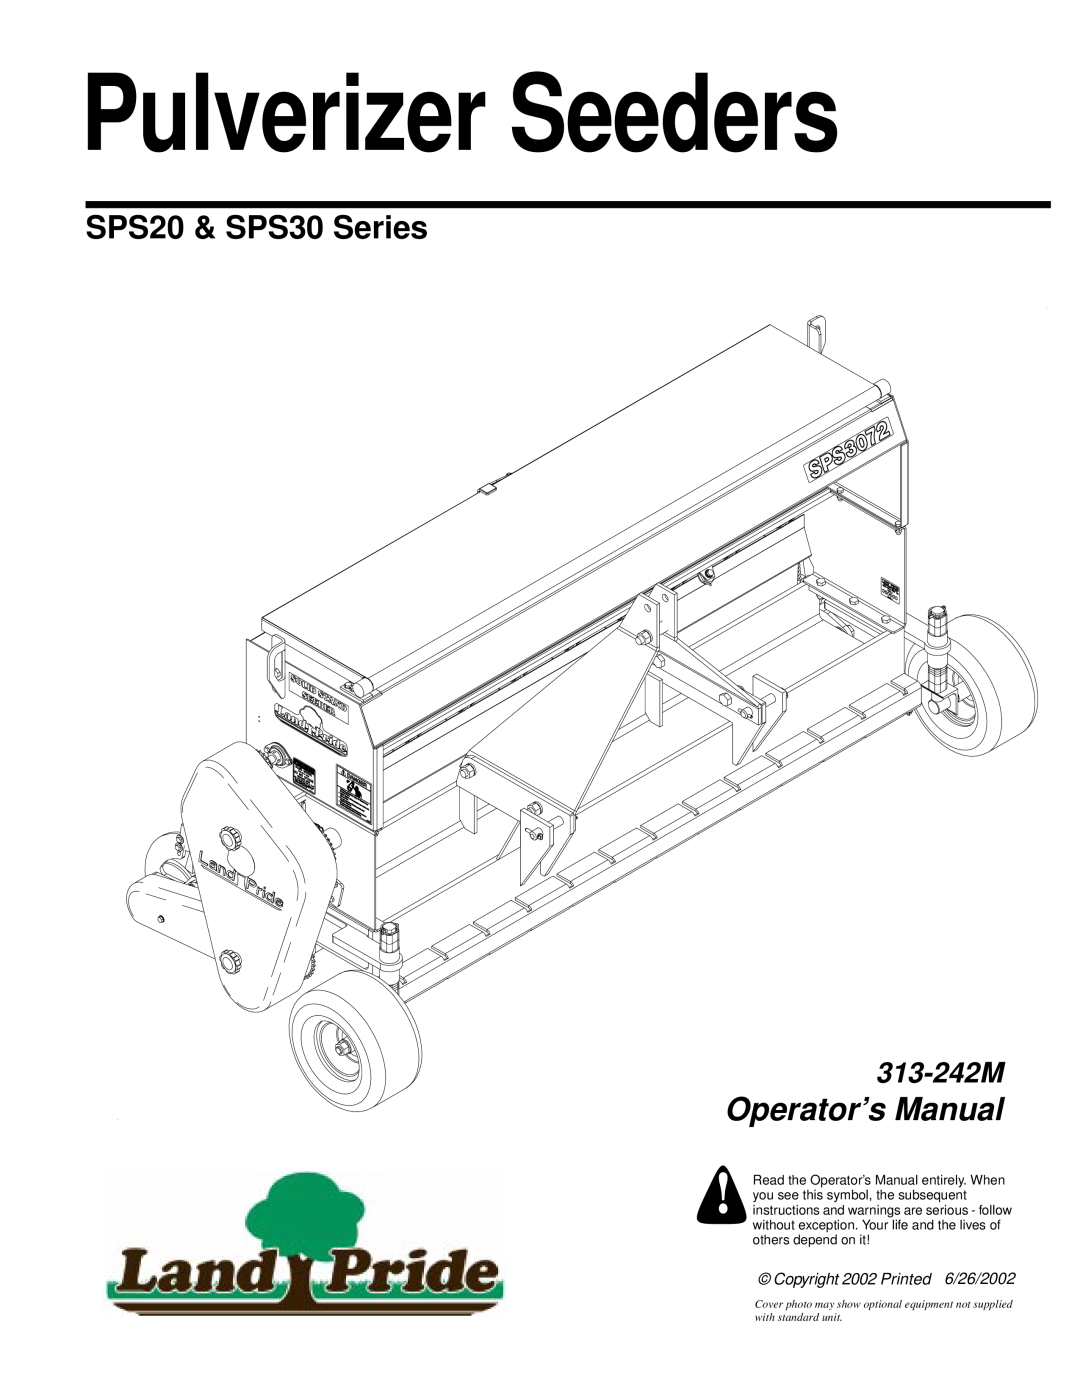 Land Pride manual Pulverizer Seeders, SPS20 & SPS30 Series, Operator’s Manual, 313-242M, others depend on it 